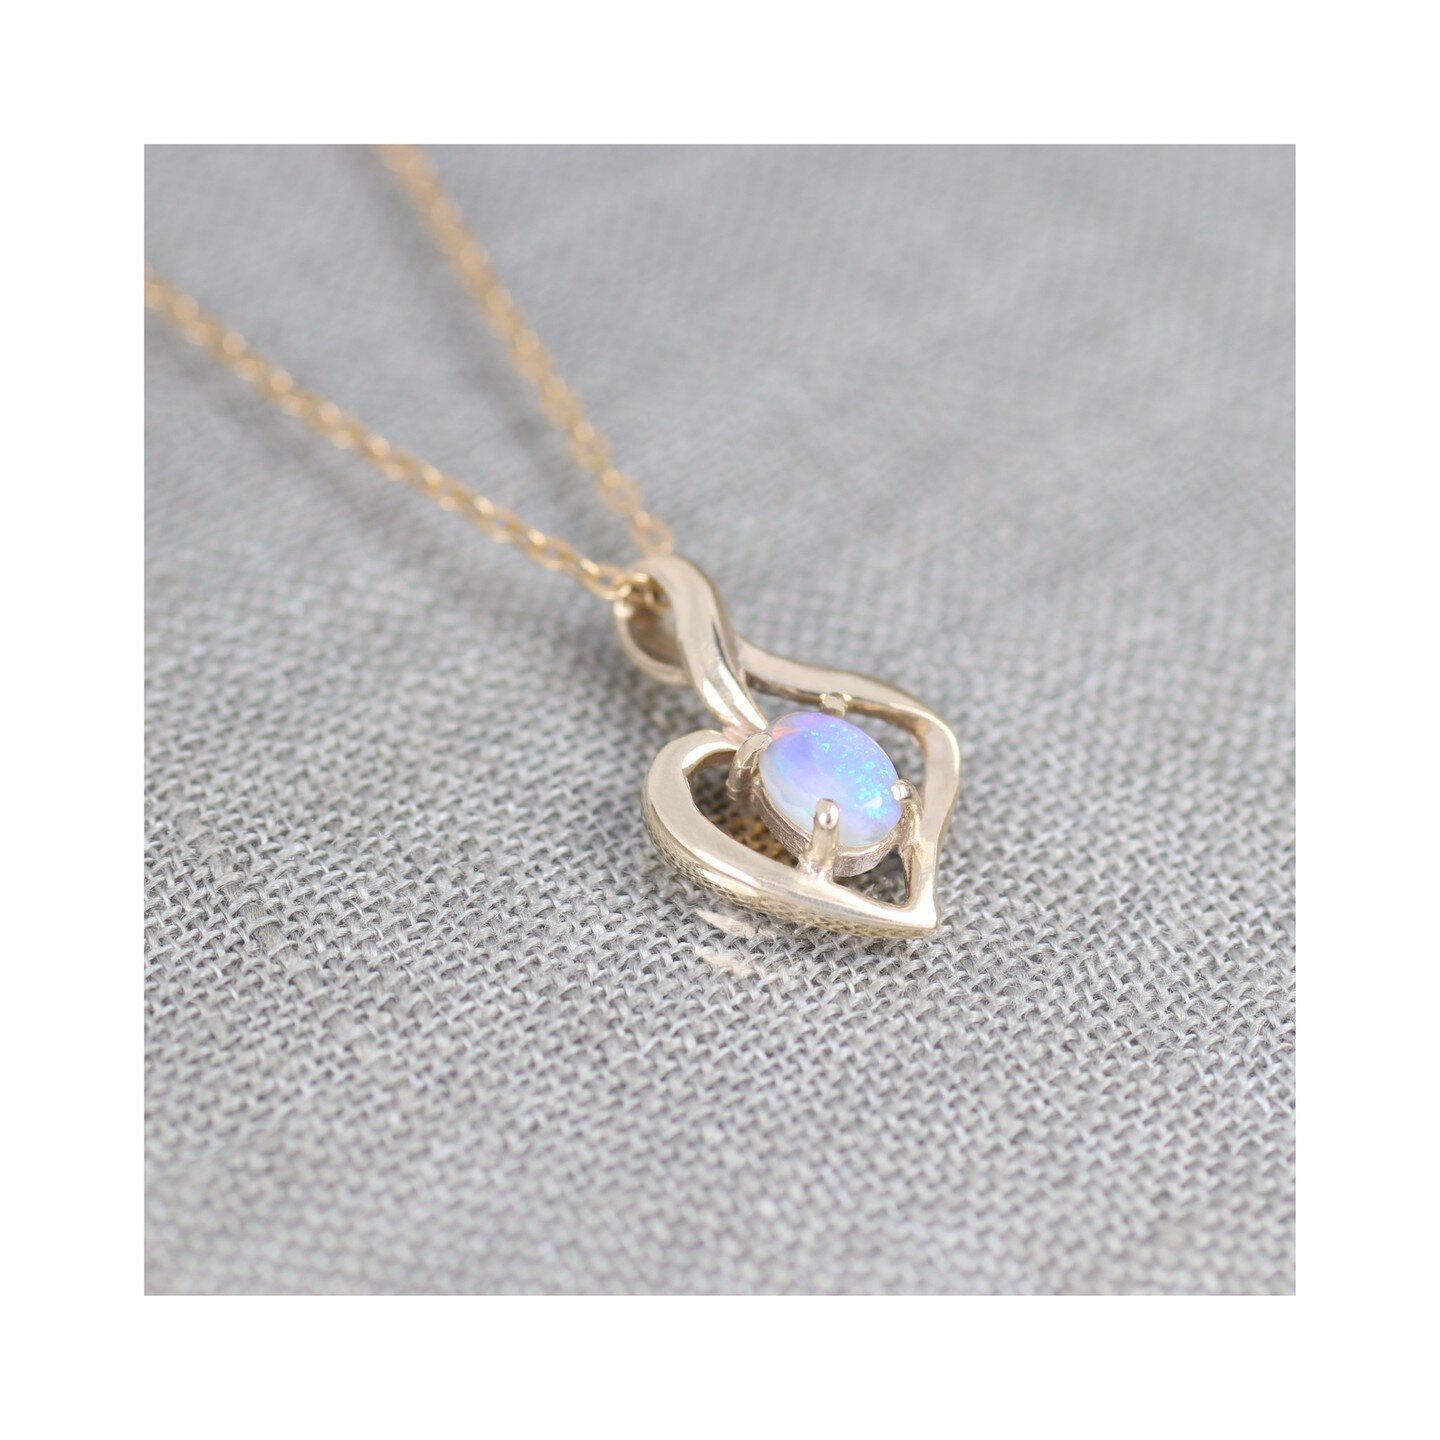 H A R P E R - Adorably sweet and petite 9ct yellow gold pendant in a classical style, featuring a sweet oval cabochon crystal opal.

Now available. Chain not included, but are available in a varity of styles upon request - prices vary.

#sustainablej